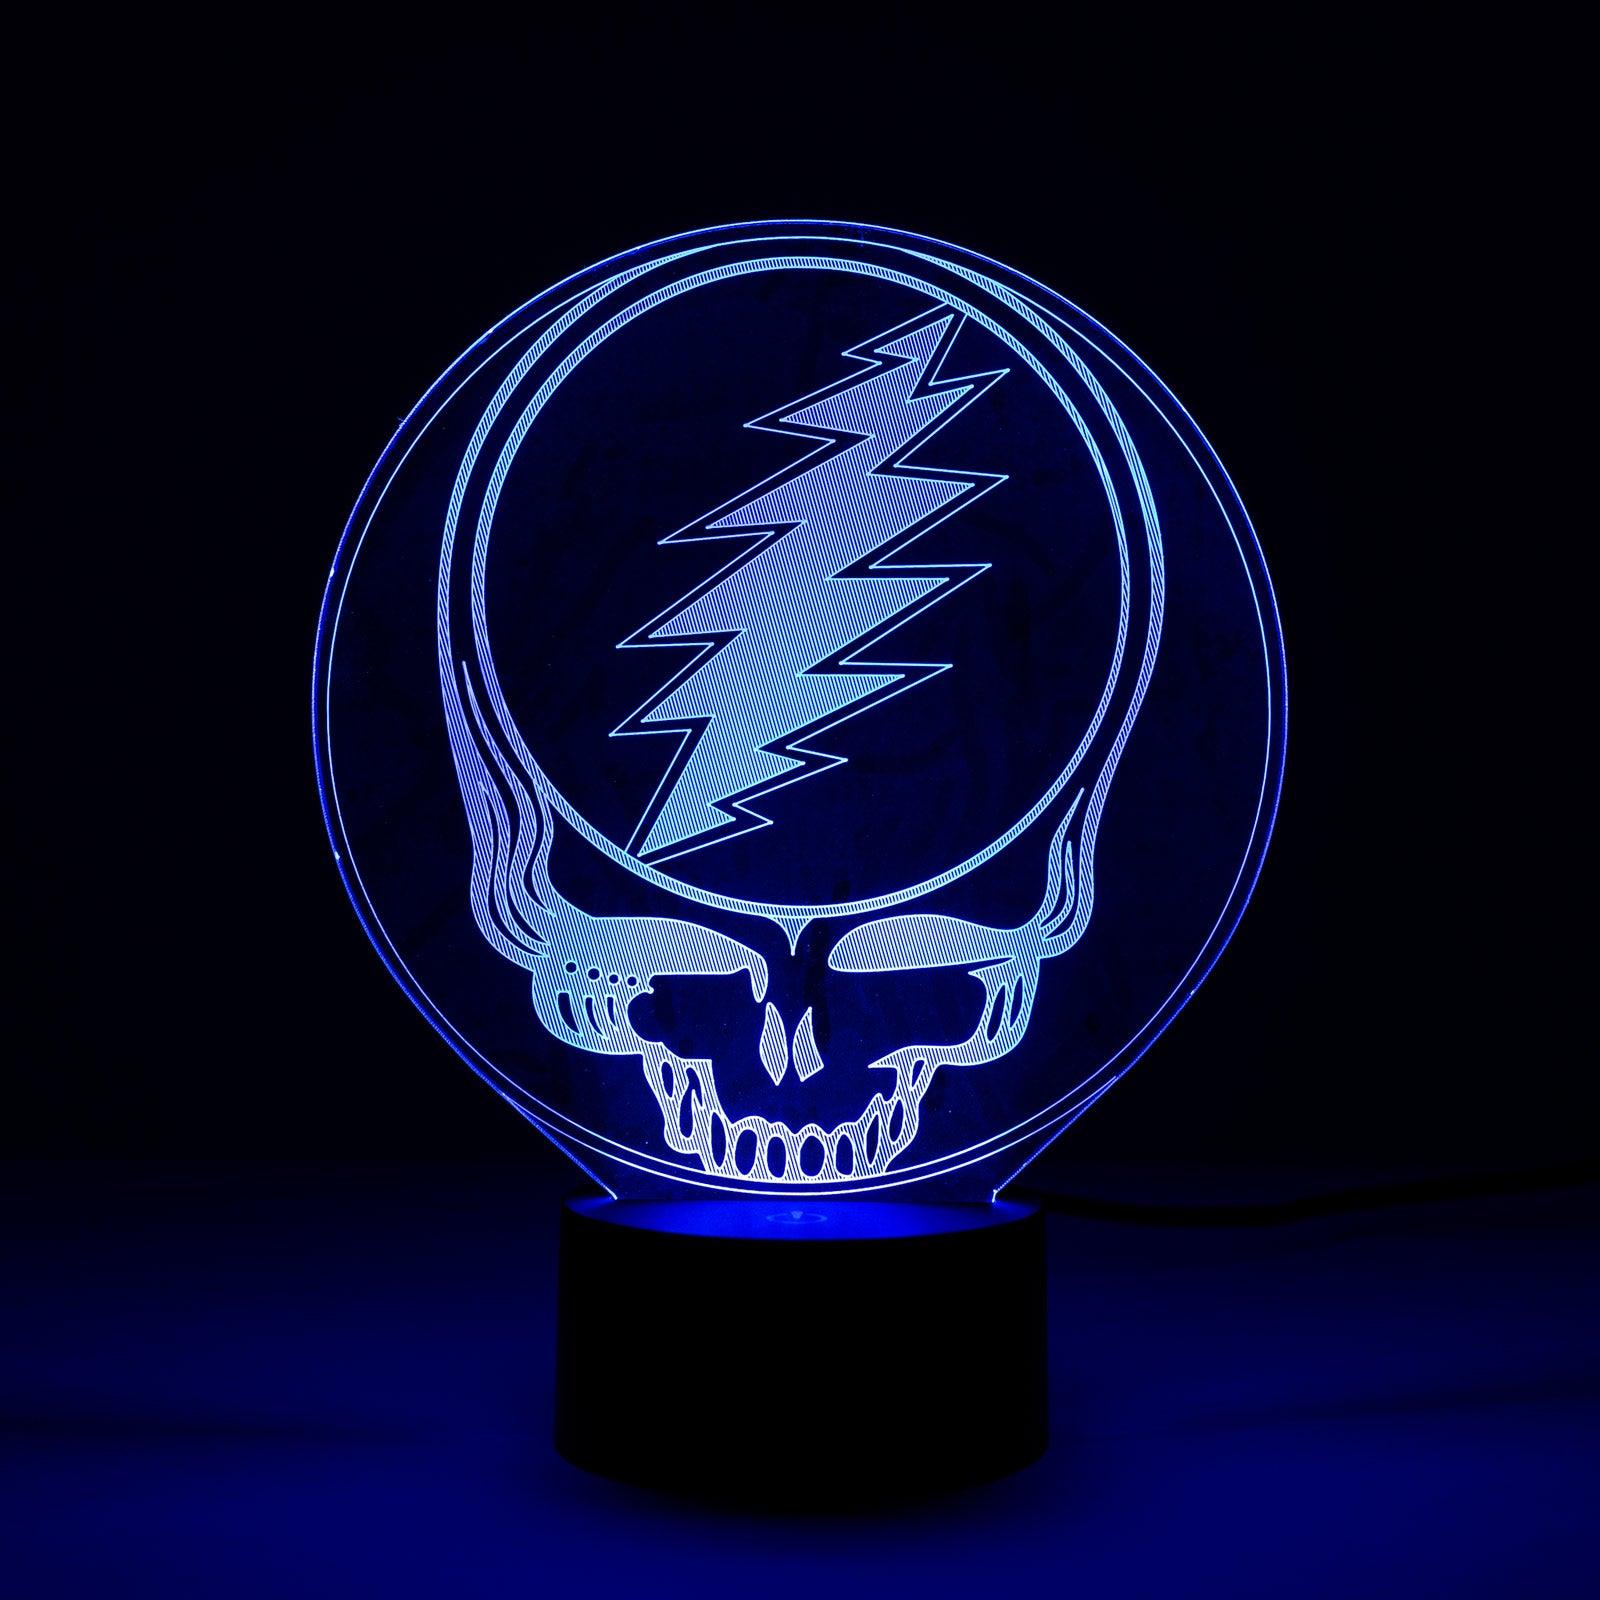 Steal Your Face - Wikipedia